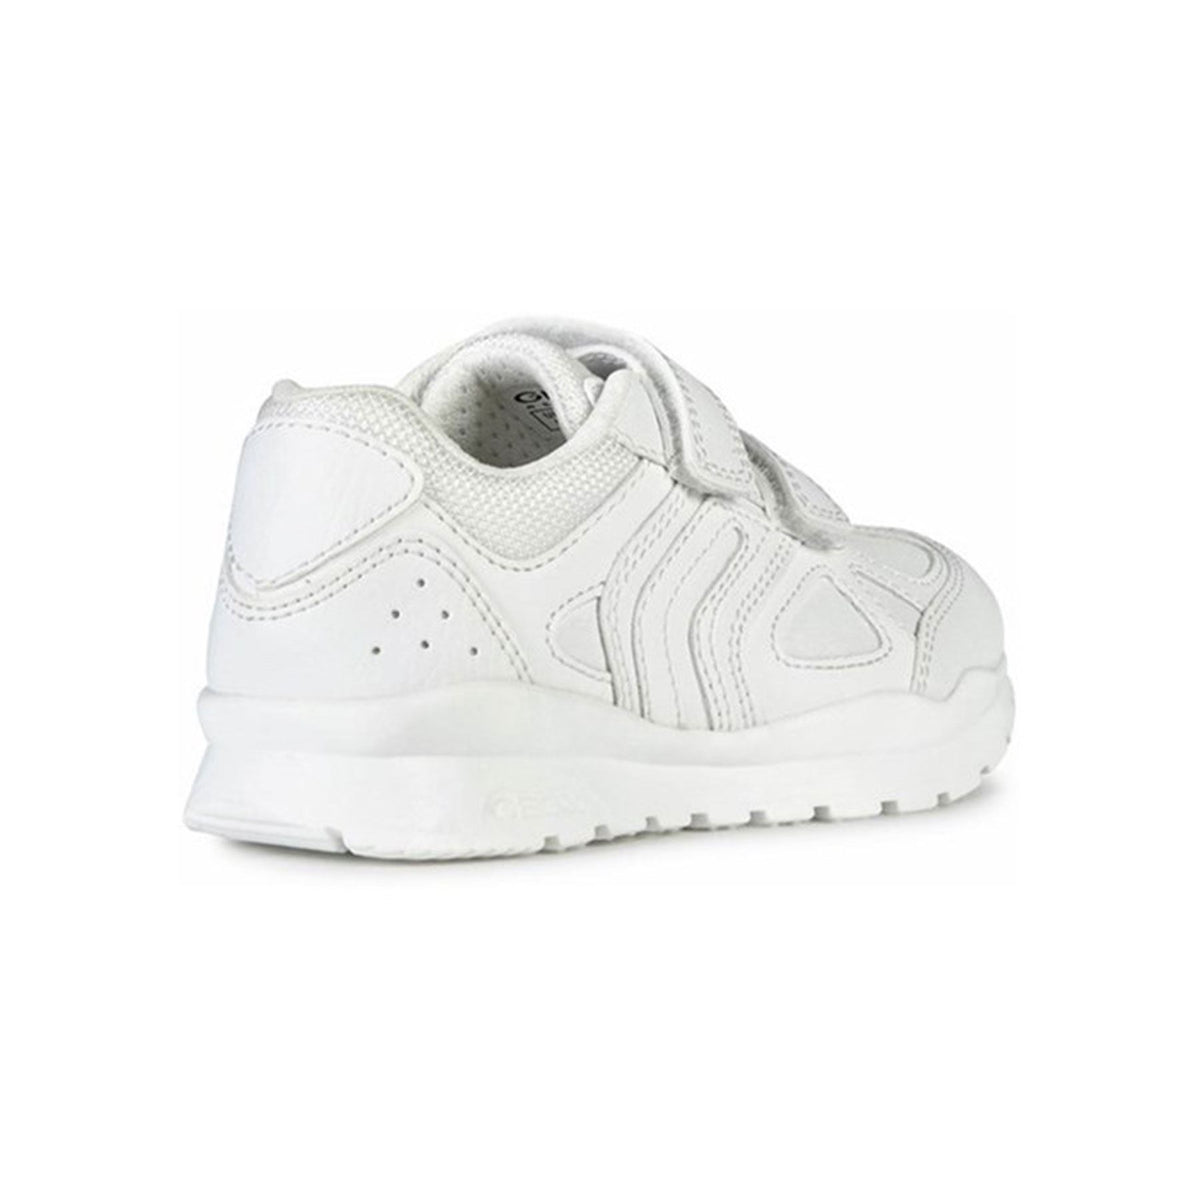 Geox Boys White Touch Fastening Pavel School Shoes